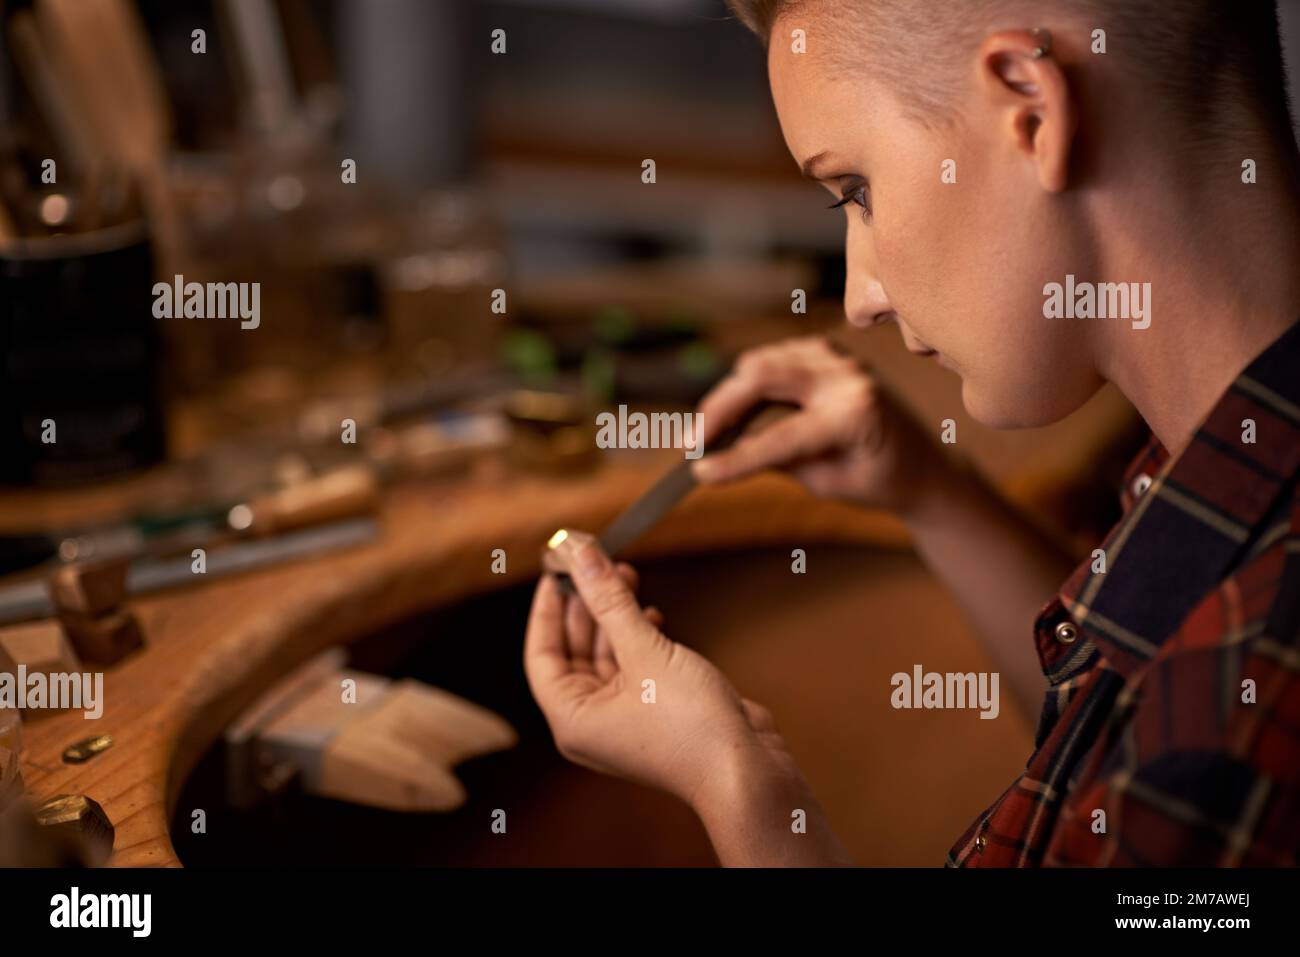 Focusing on getting the details right. A young woman working with tools at a wooden work station. Stock Photo